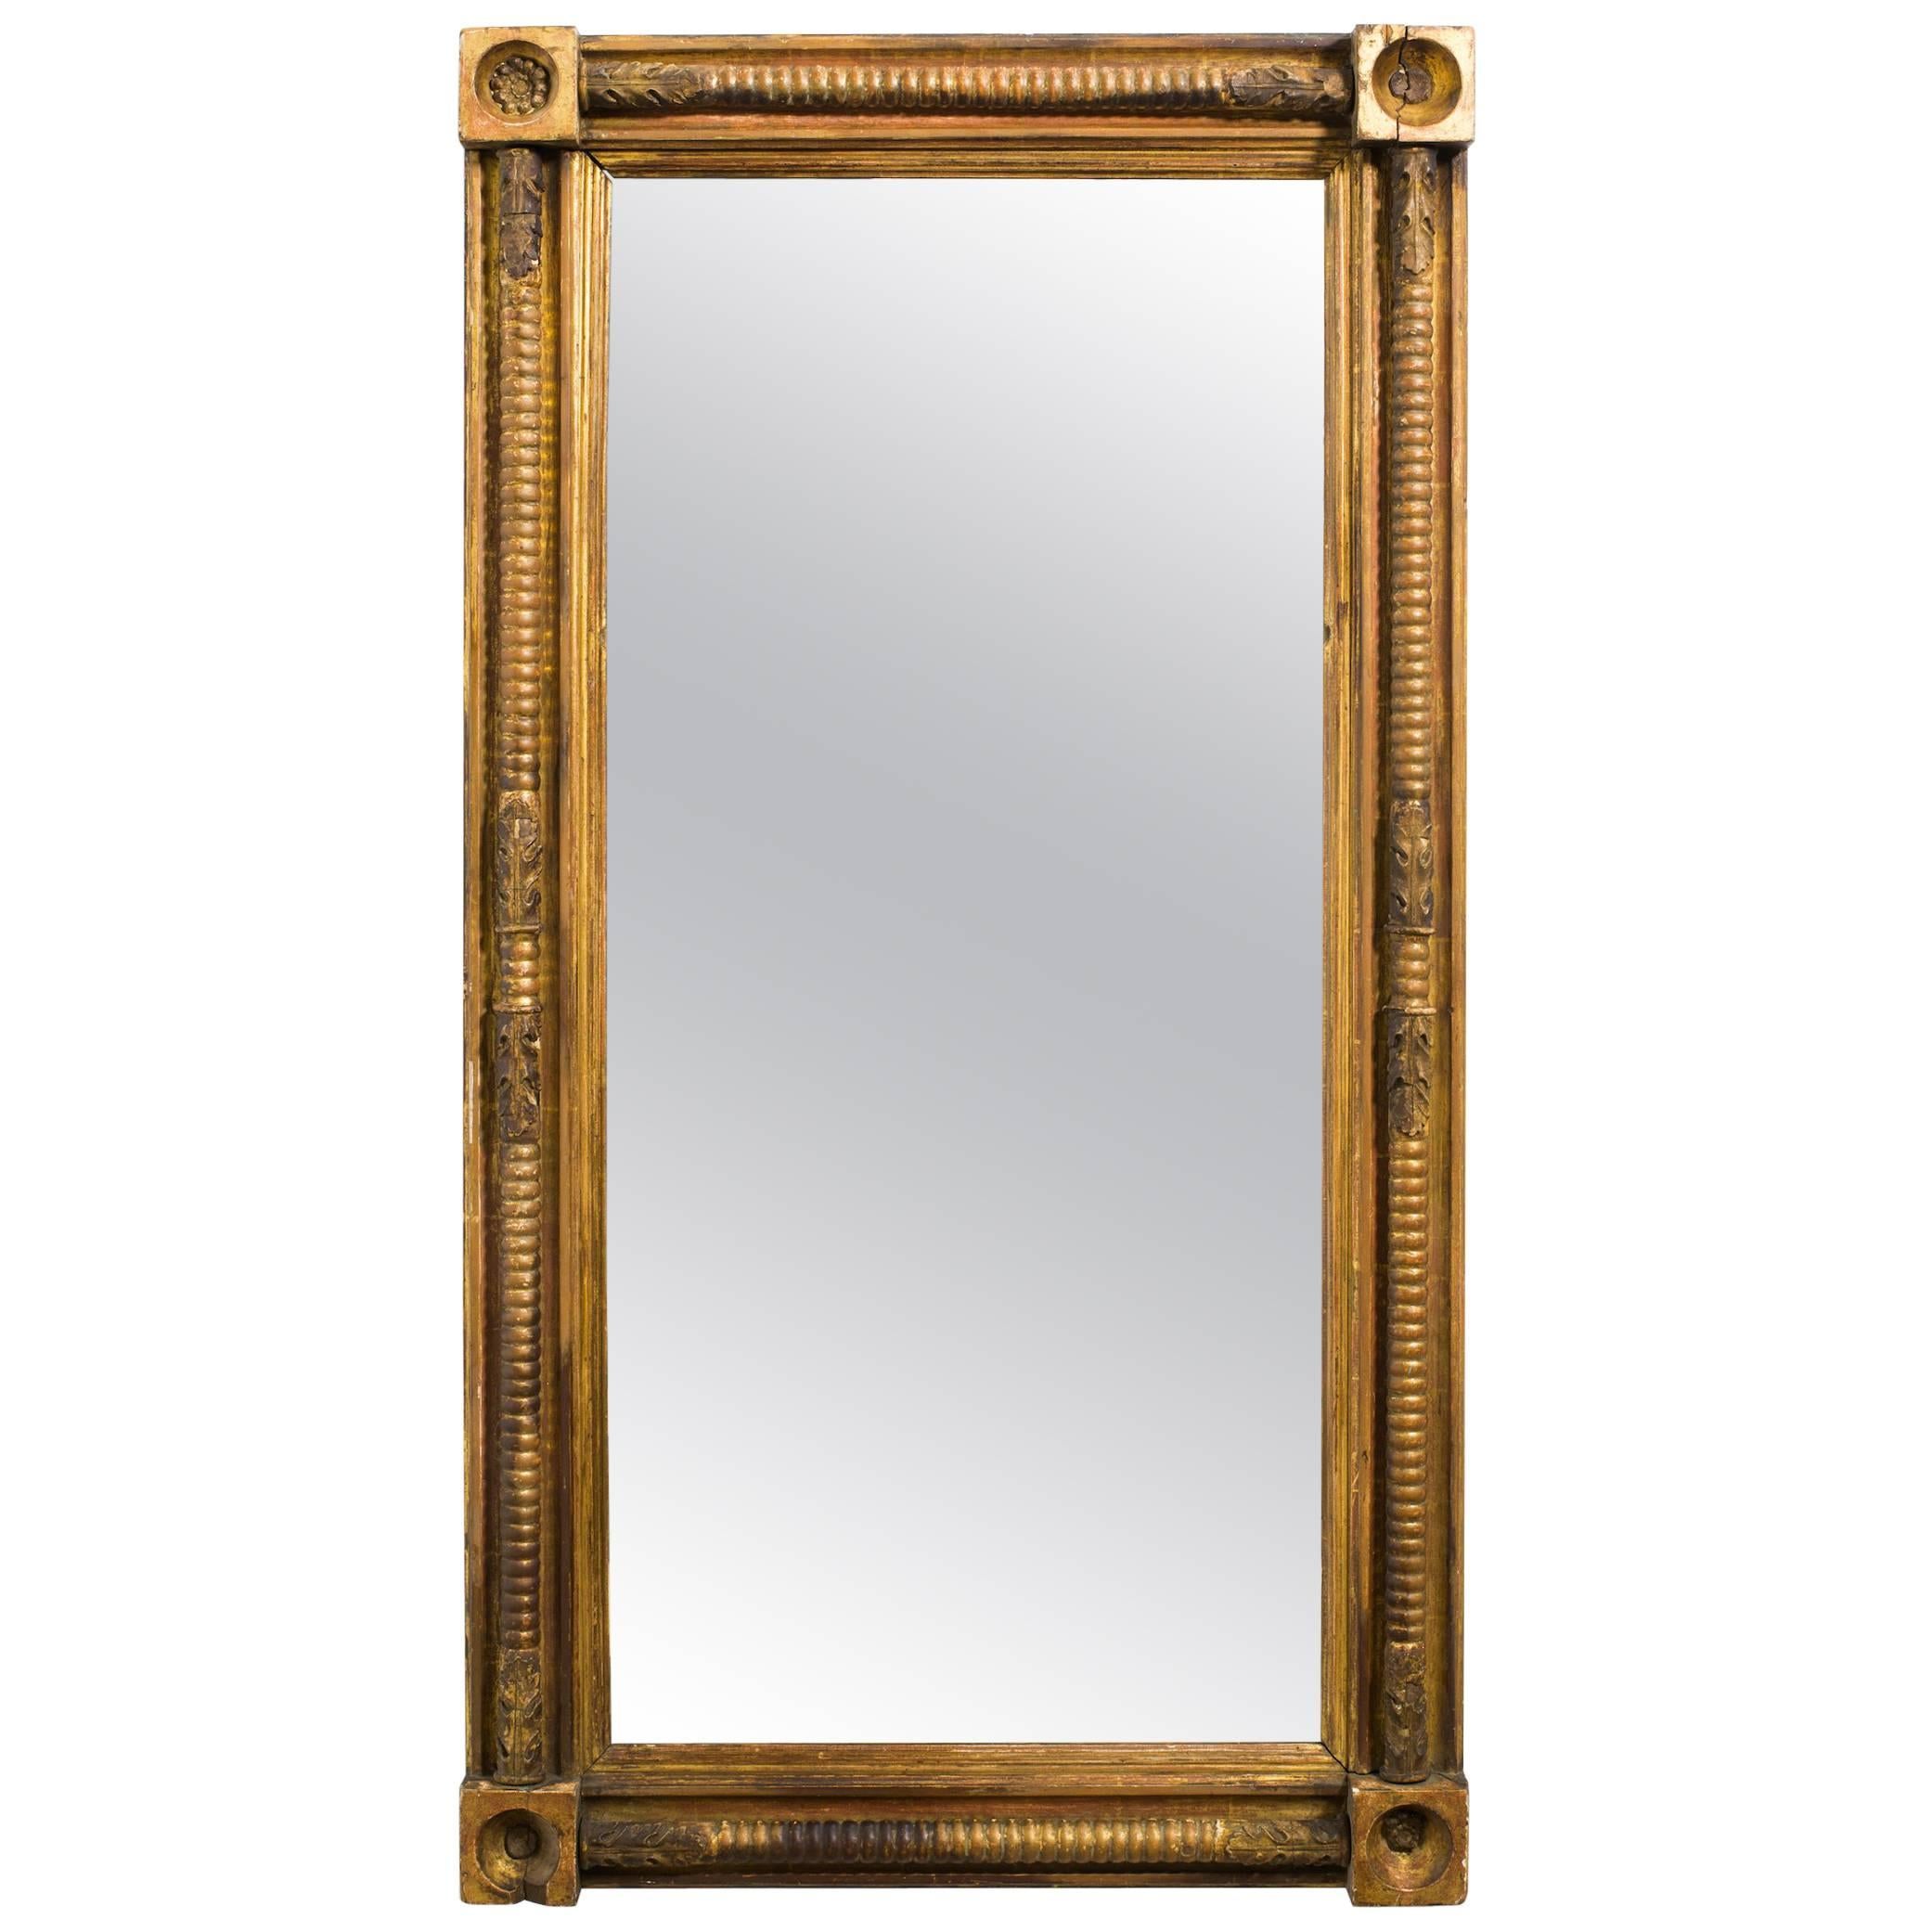 1820s English Federal Giltwood Mirror For Sale